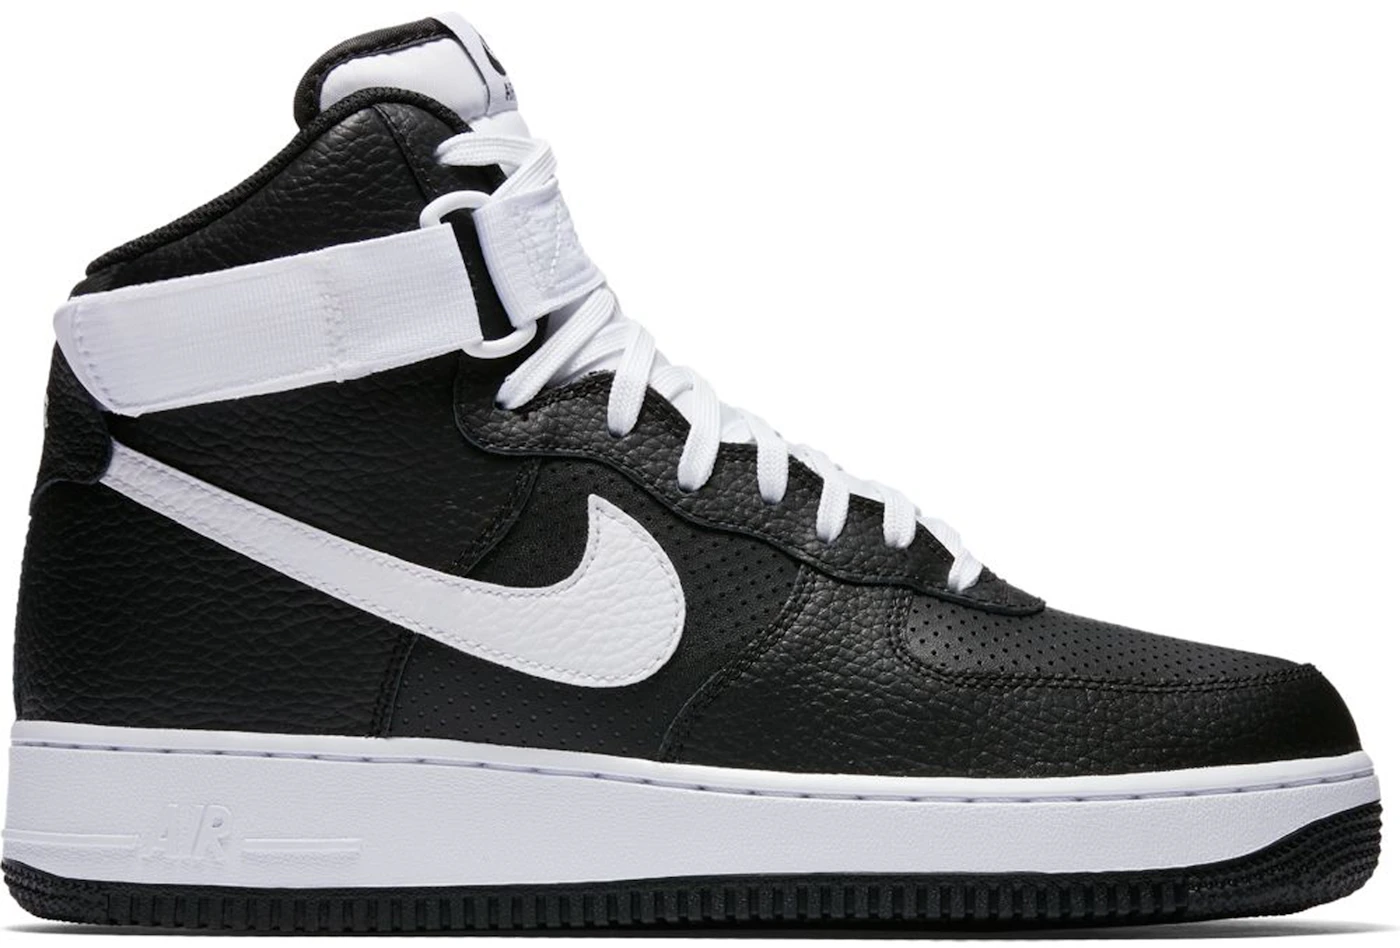 Air force 1 high trainers Nike x Off-White Black size 44 EU in Rubber -  28969320